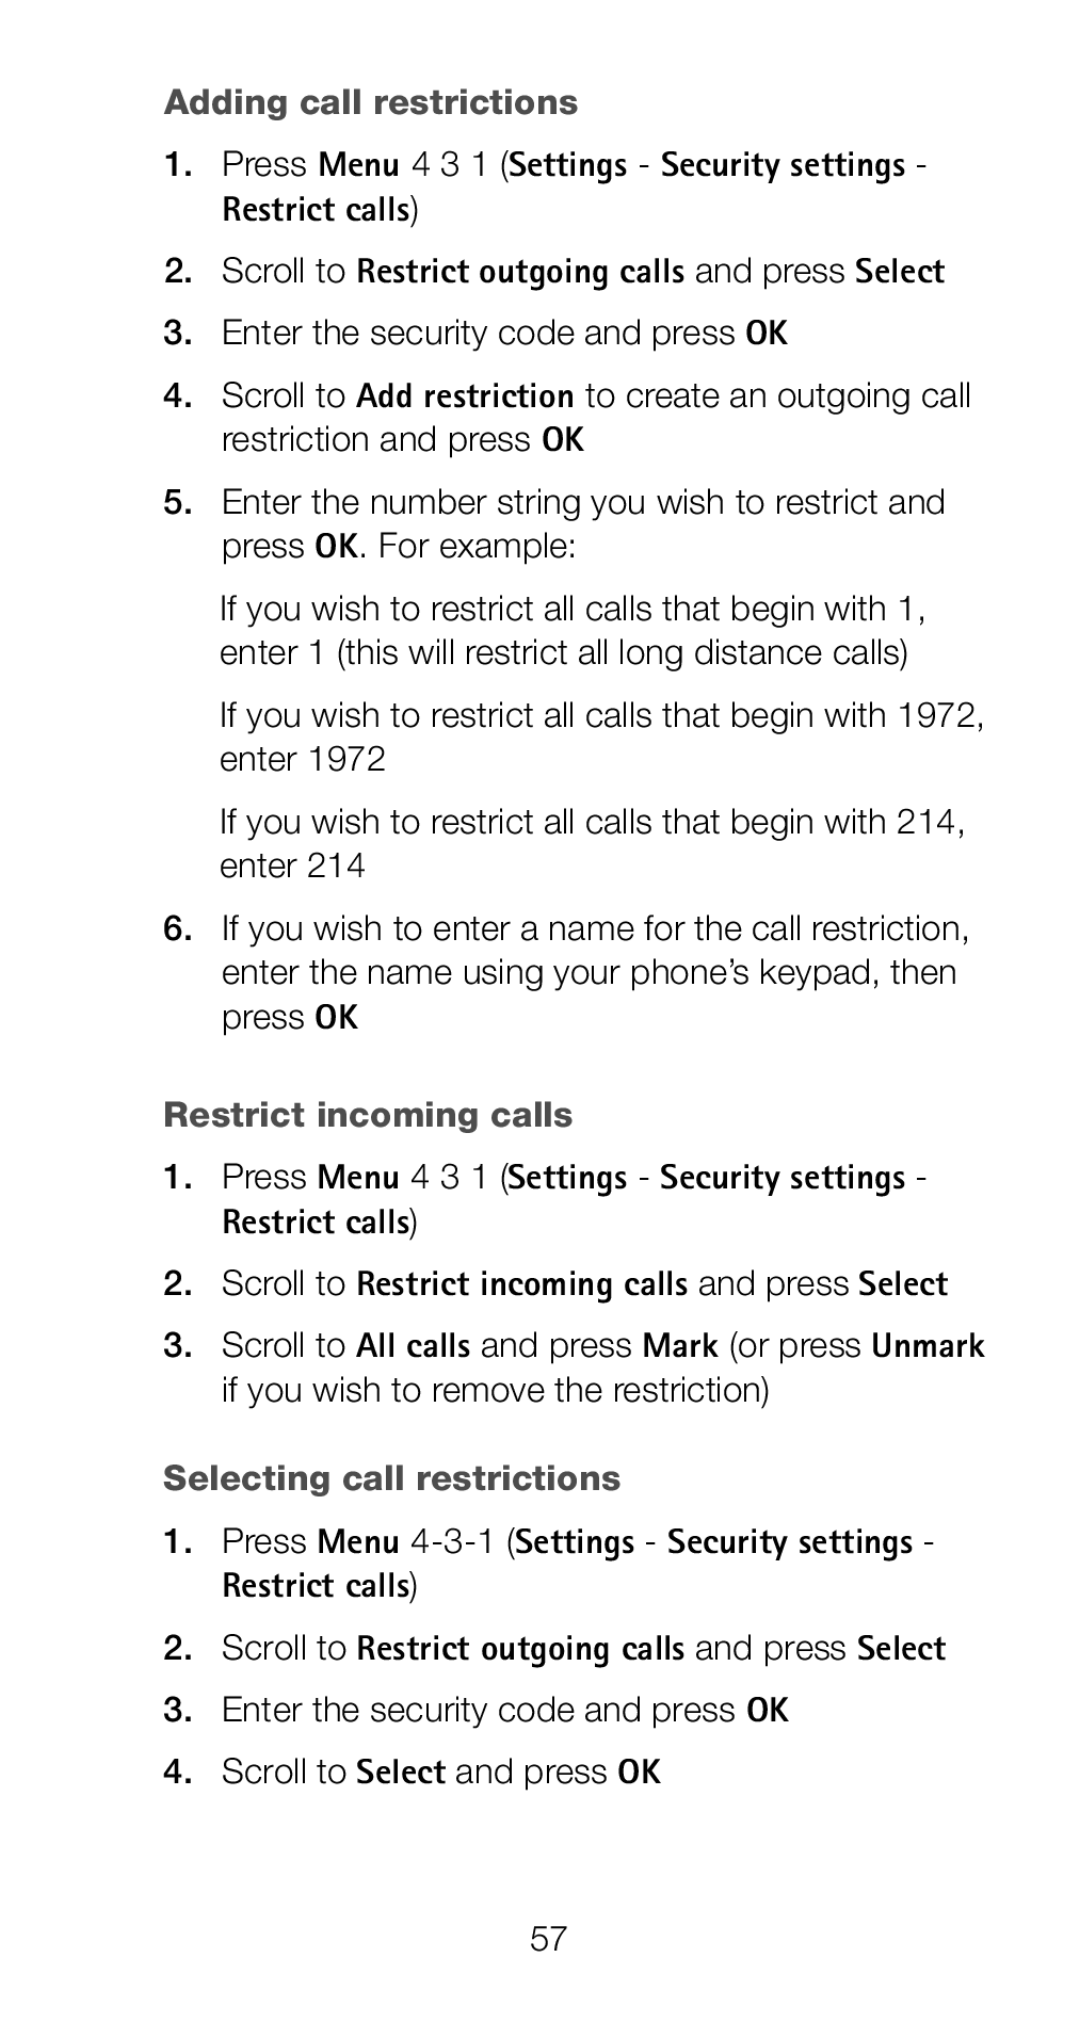 Nokia 6161i owner manual Adding call restrictions, Restrict incoming calls, Selecting call restrictions 